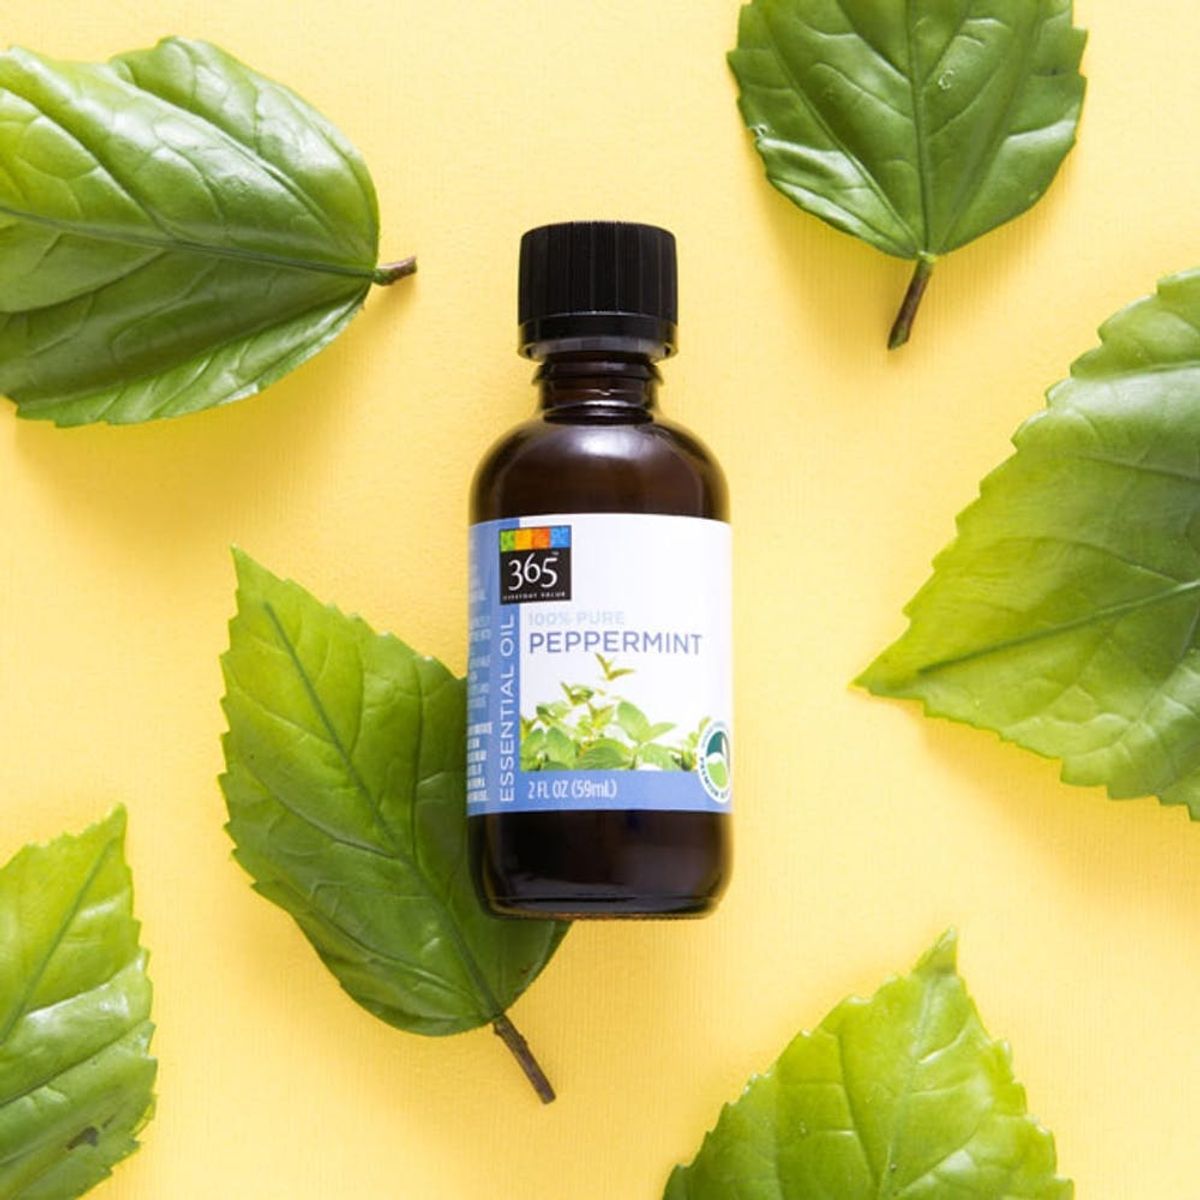 7 Ways I Use Peppermint Essential Oil to Feel Better